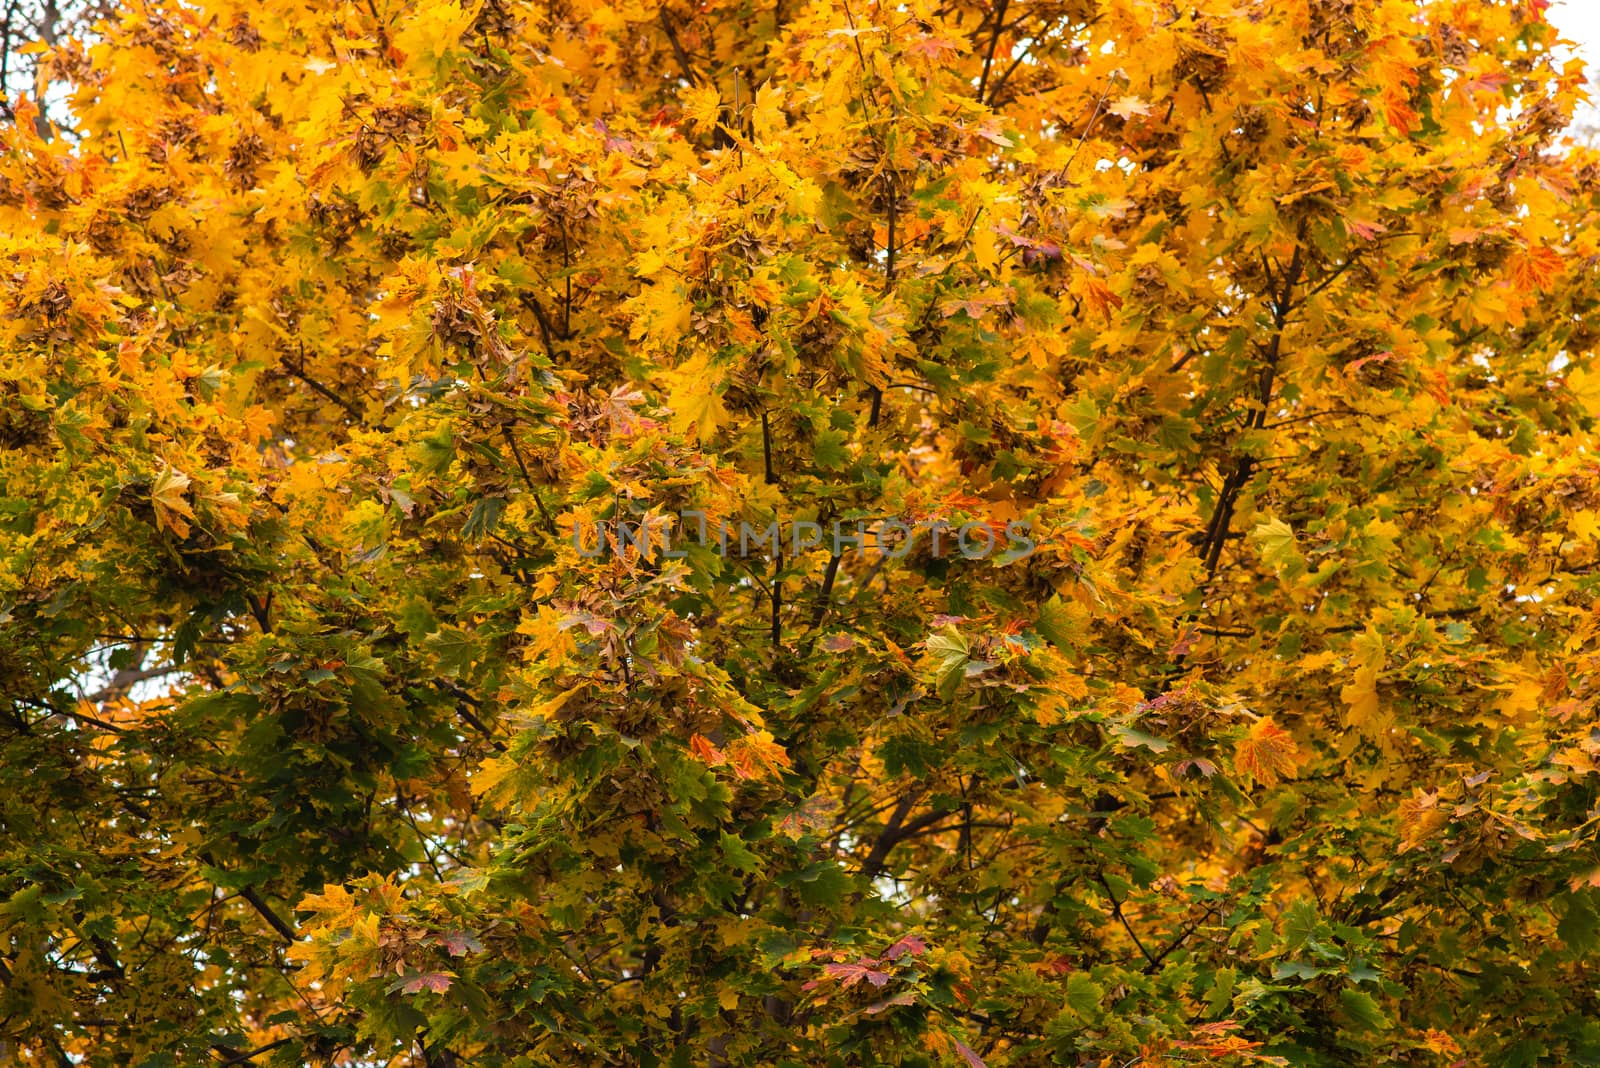 The yellow foliage of a tree in Autumn in a park in nature.